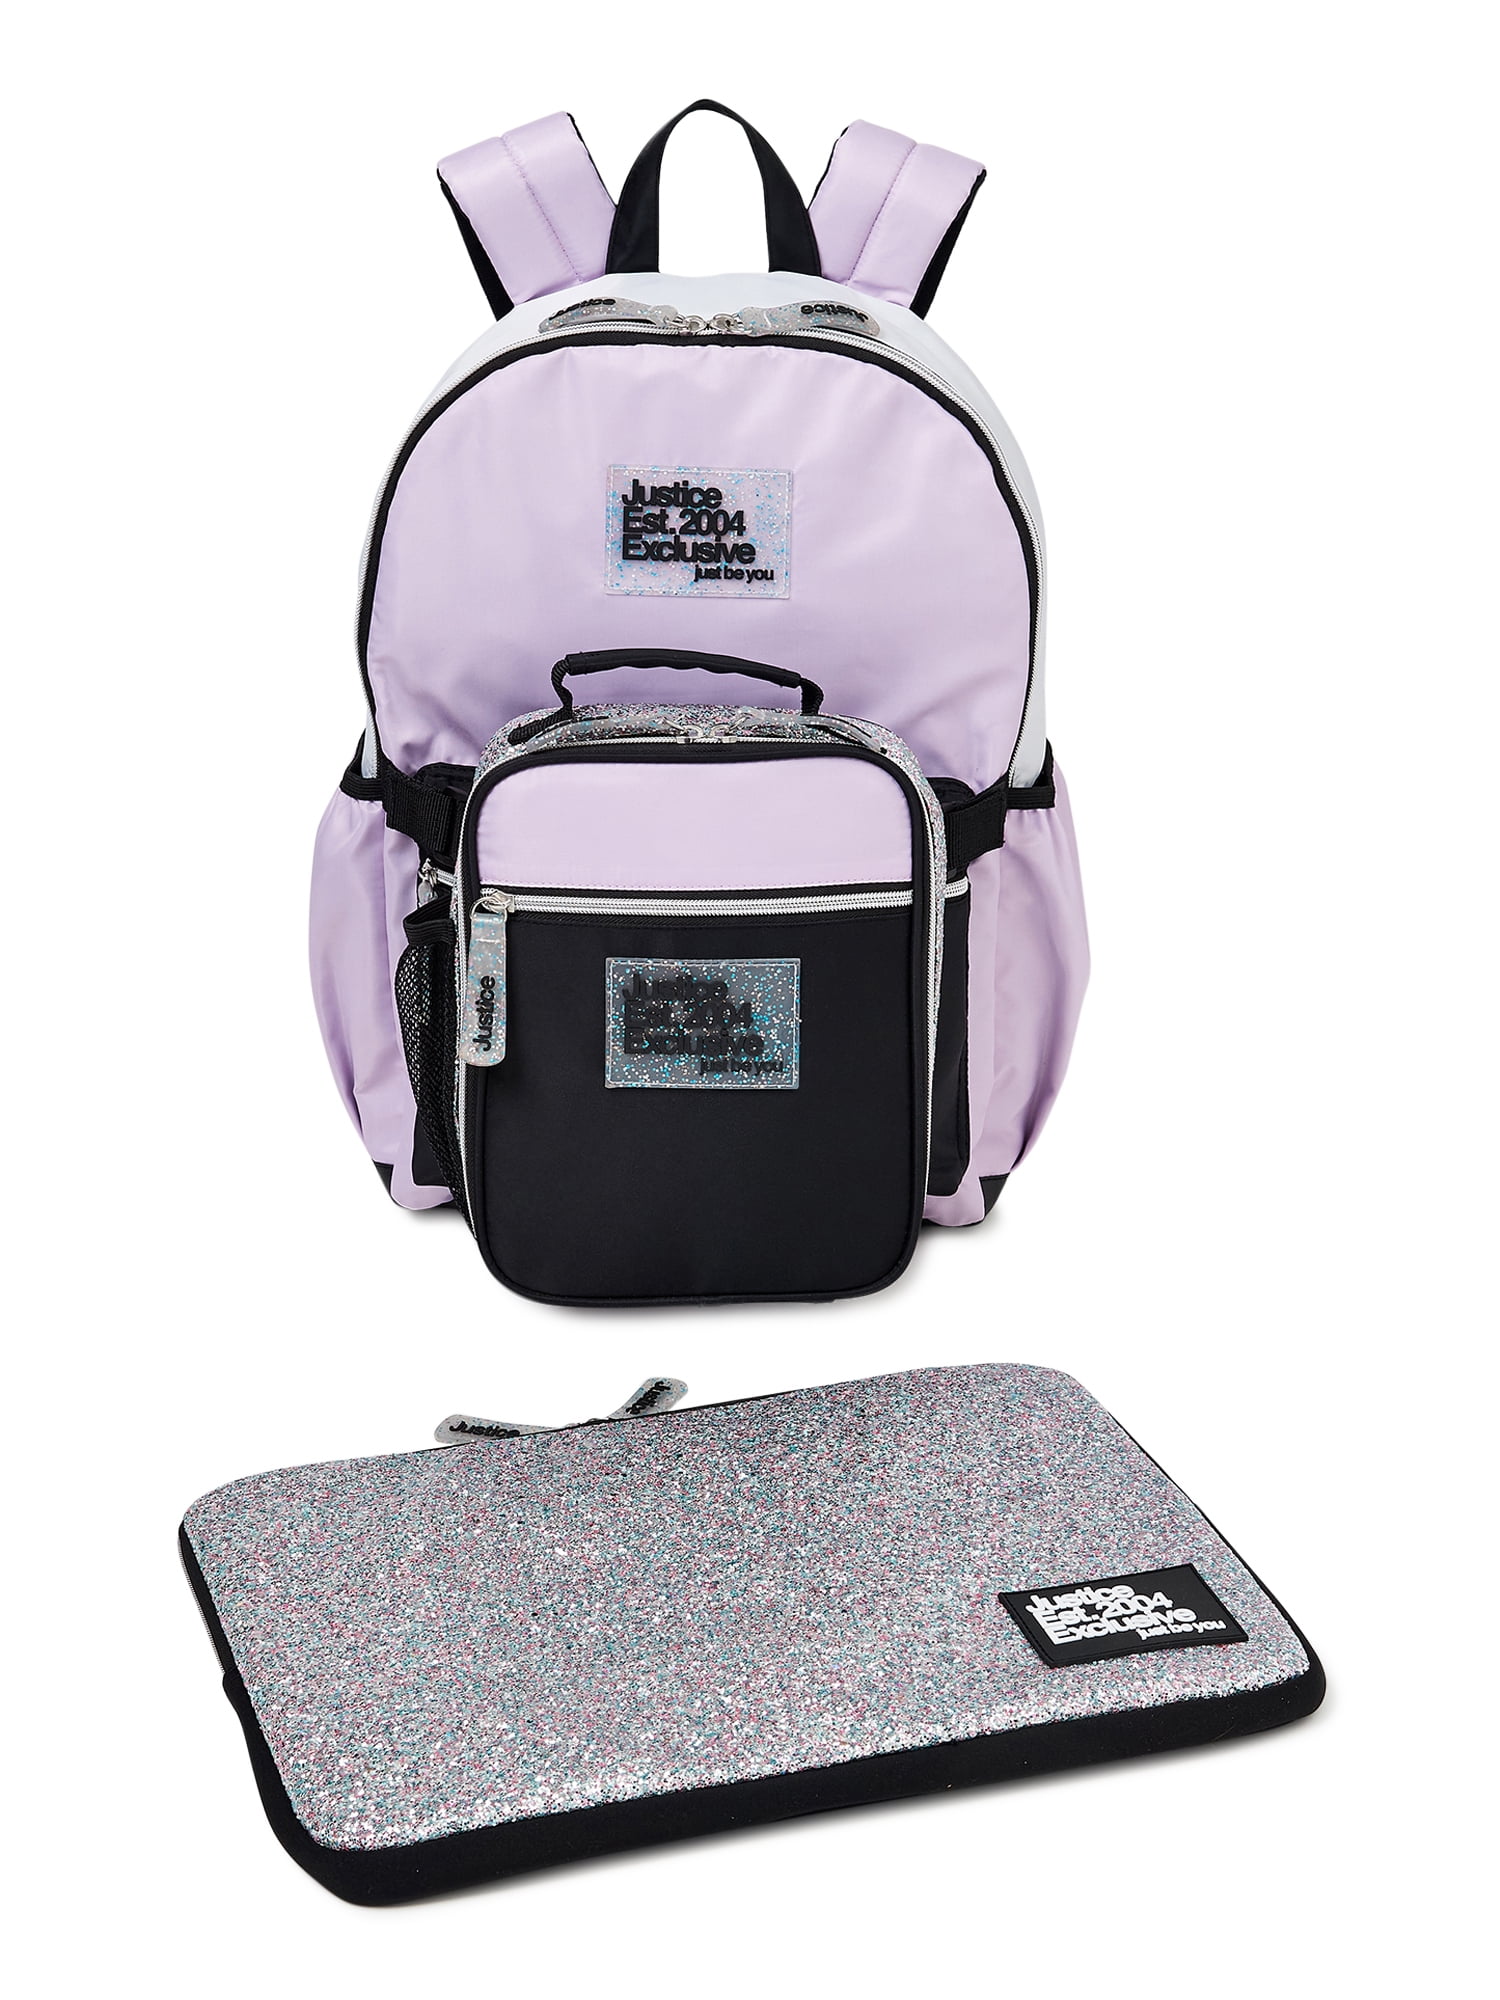 Blue ZBK Starry Sky Backpack For Girls,Laptop Backpack For Women,School Bag,With Lunch Bag And Pen case